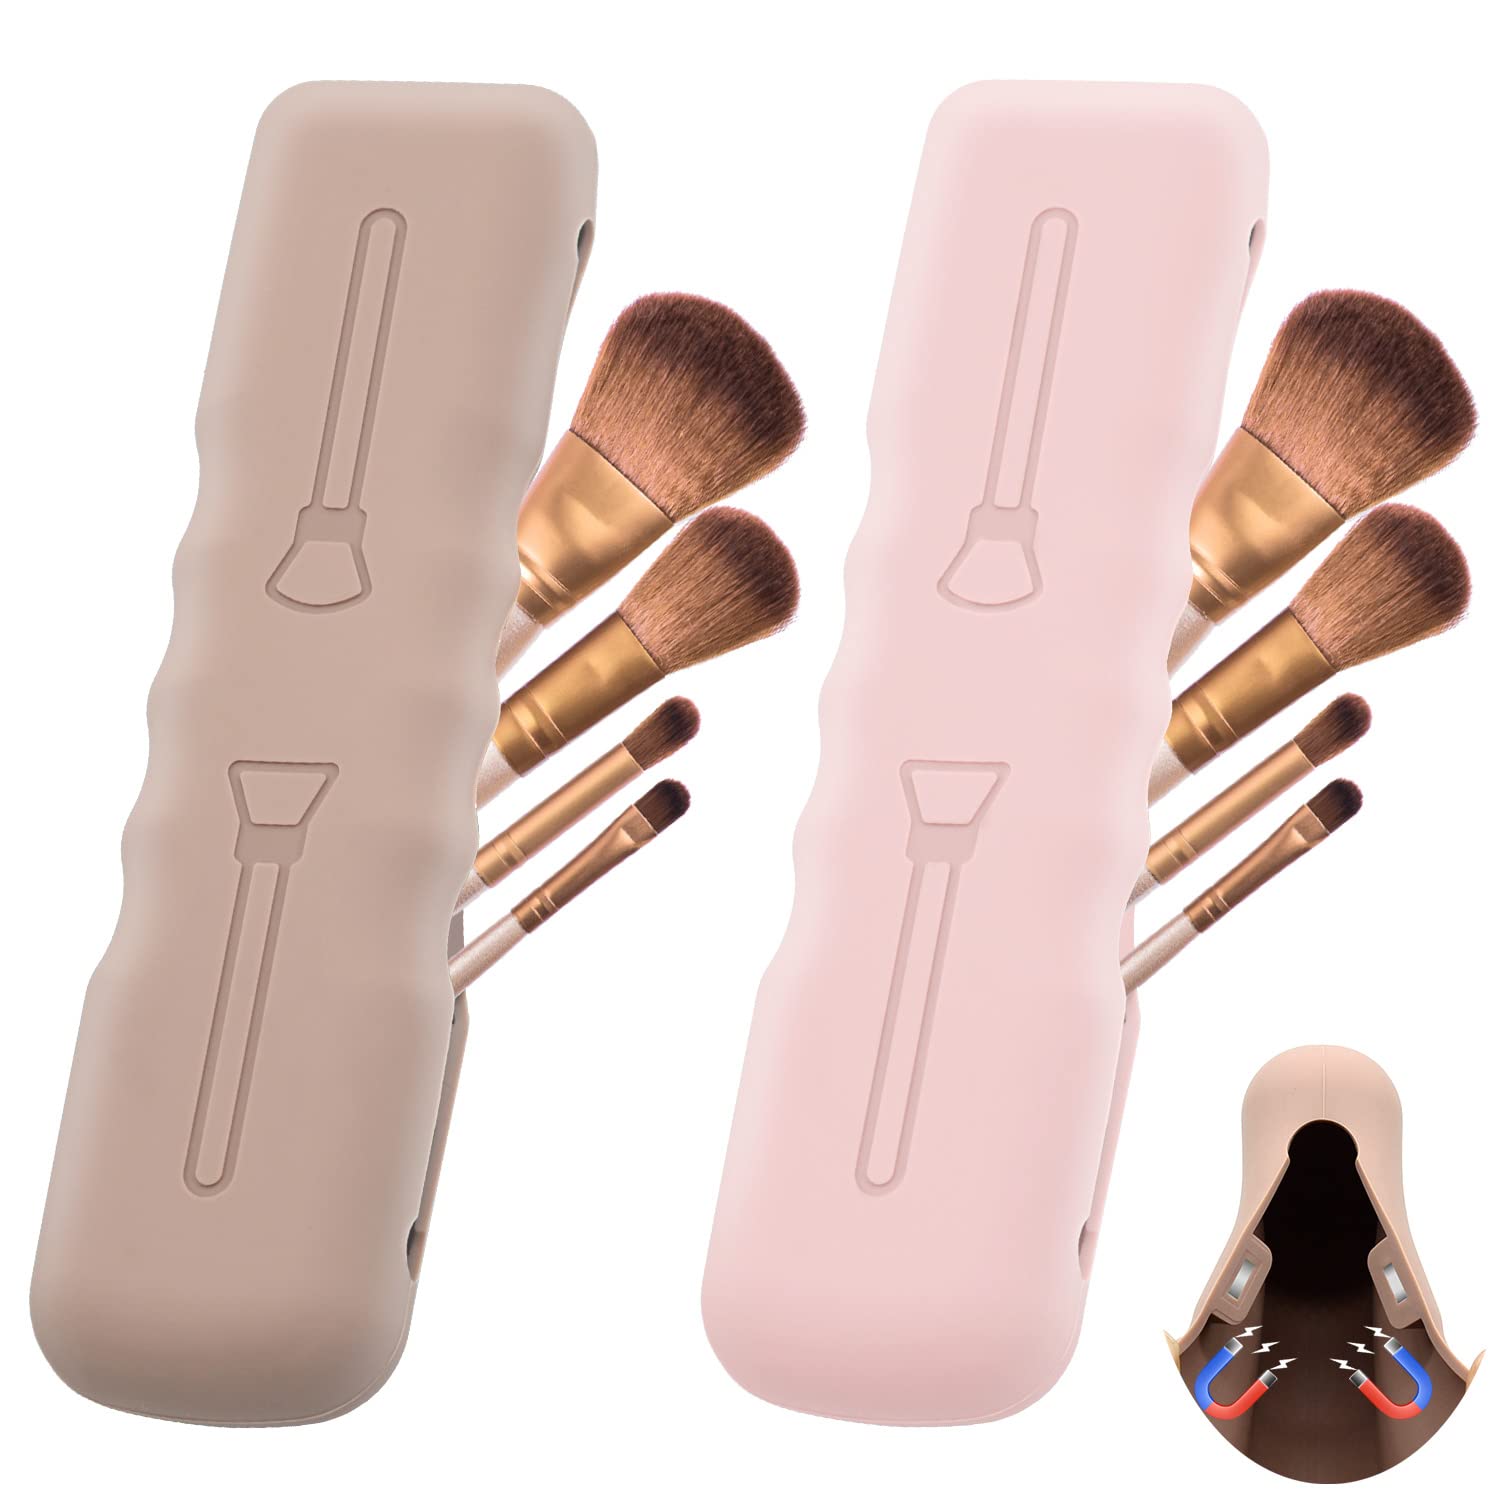 Hydream 2Pack Makeup Brush Holder Travel Silicone Makeup Brush Case Bag  Cute Soft Portable Cosmetic Brushes Holders Magnetic Closure Waterproof  Makeup Brushes Organizer for Traveling-Pink Khaki